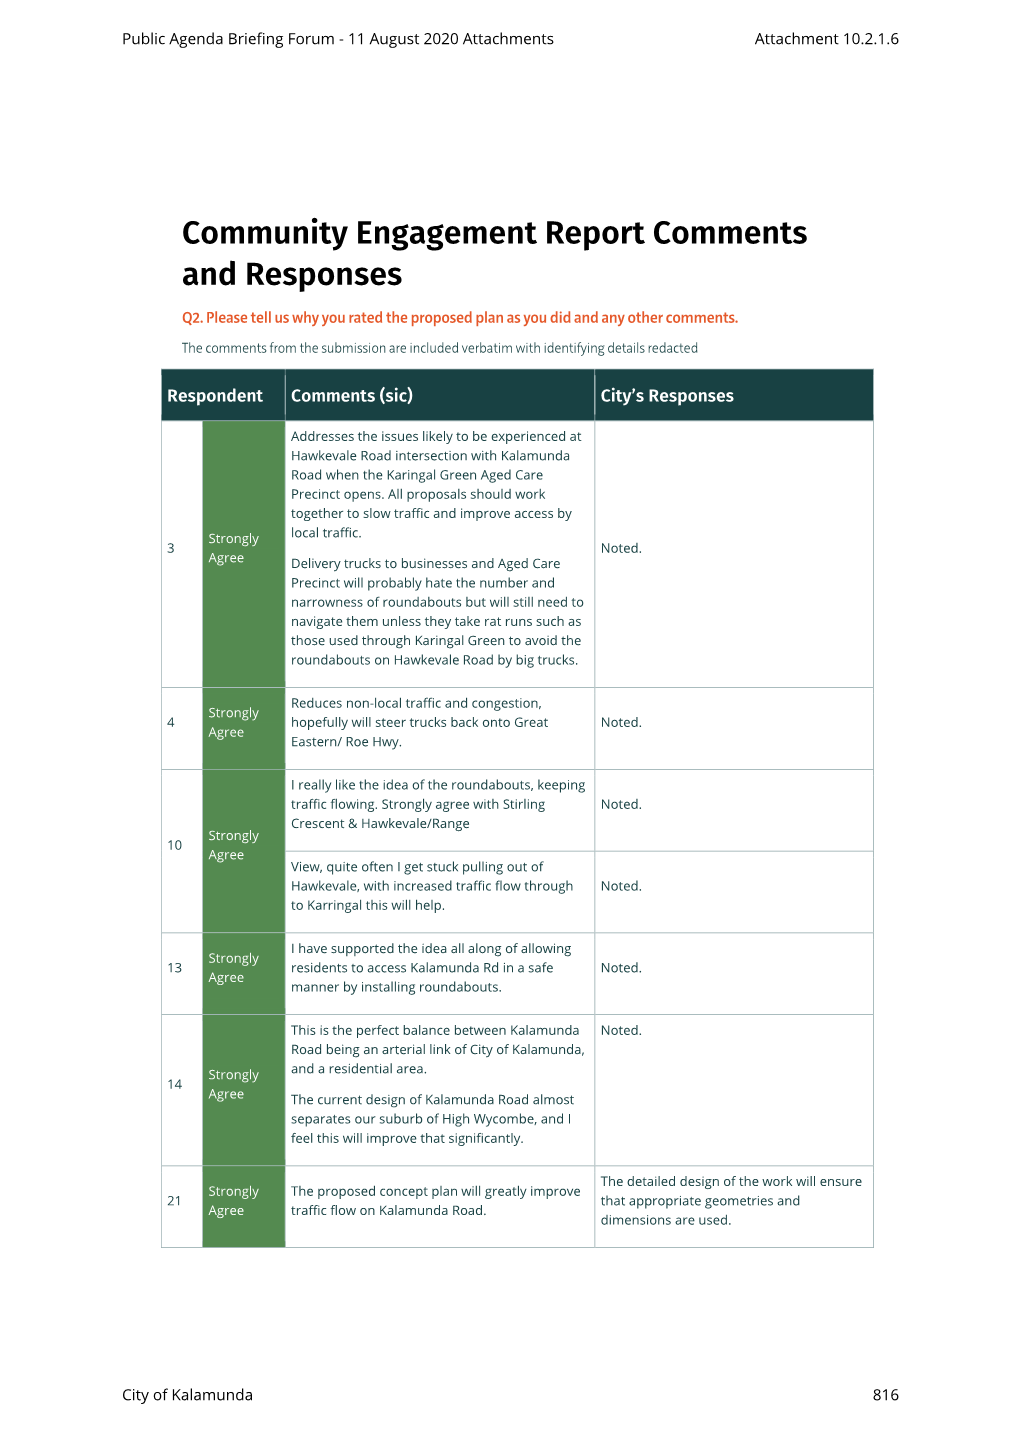 Community Engagement Report Comments and Responses Q2